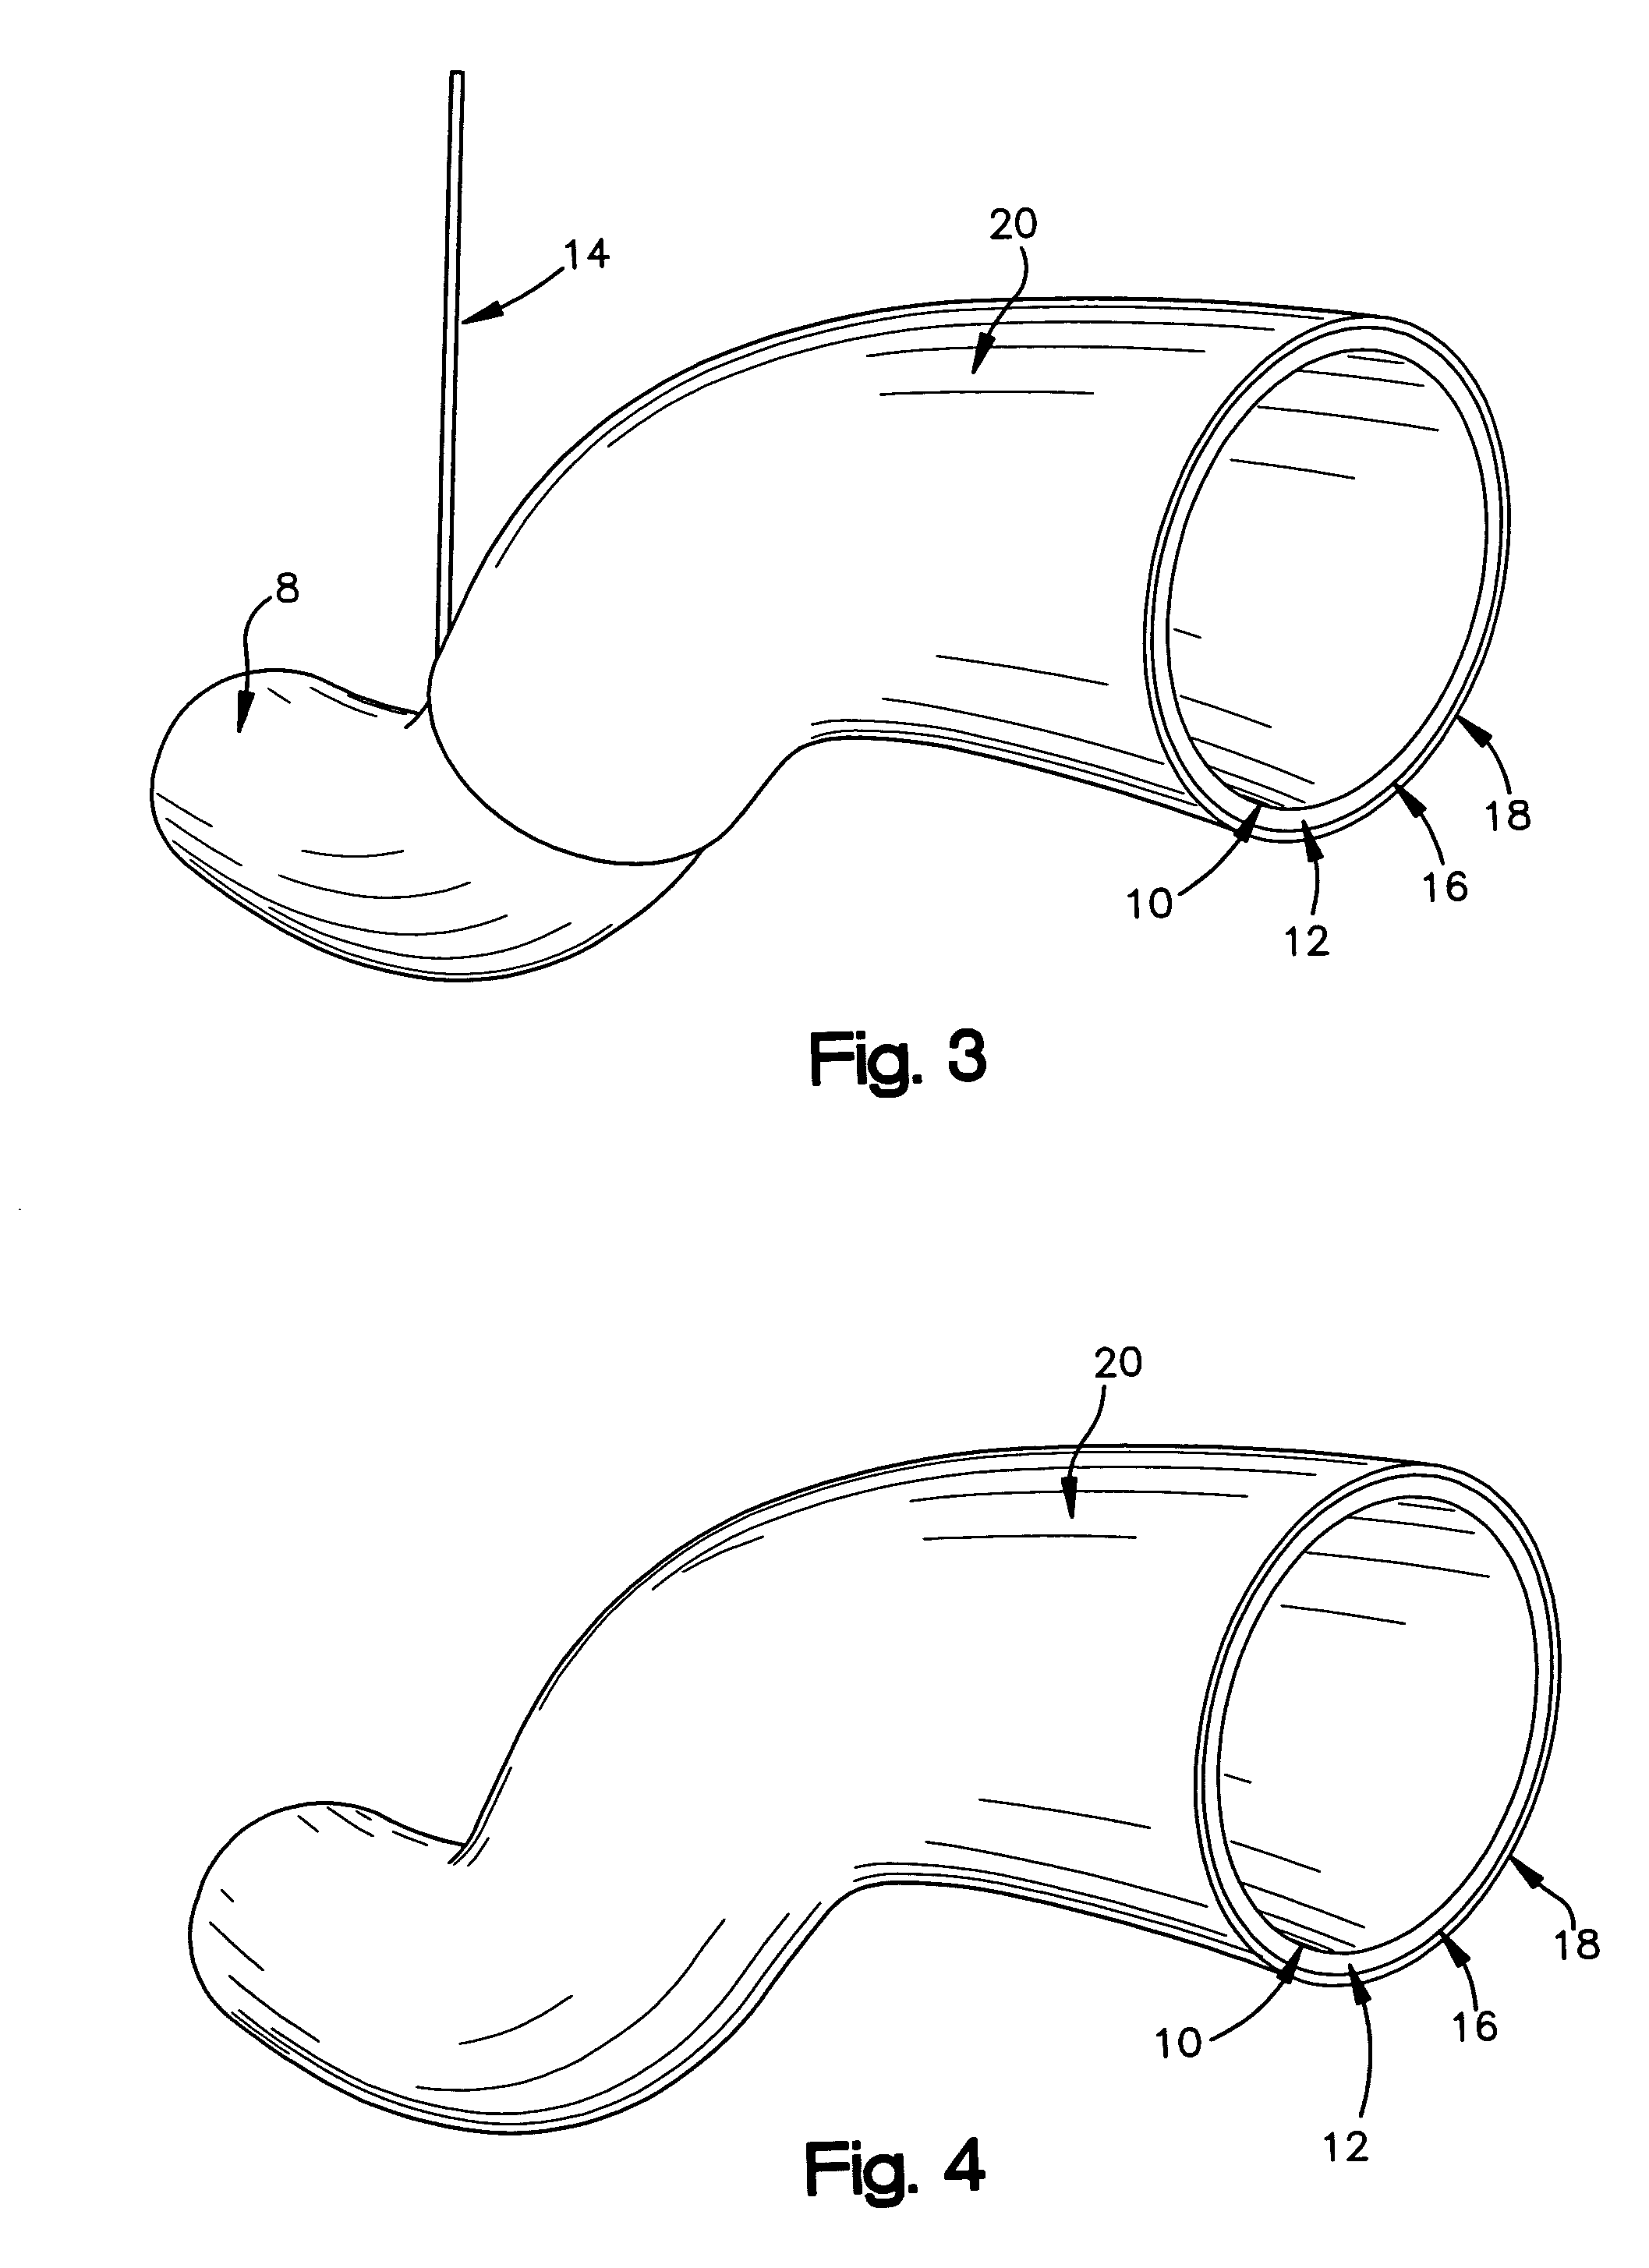 Method of using a shape memory material as a mandrel for composite part manufacturing